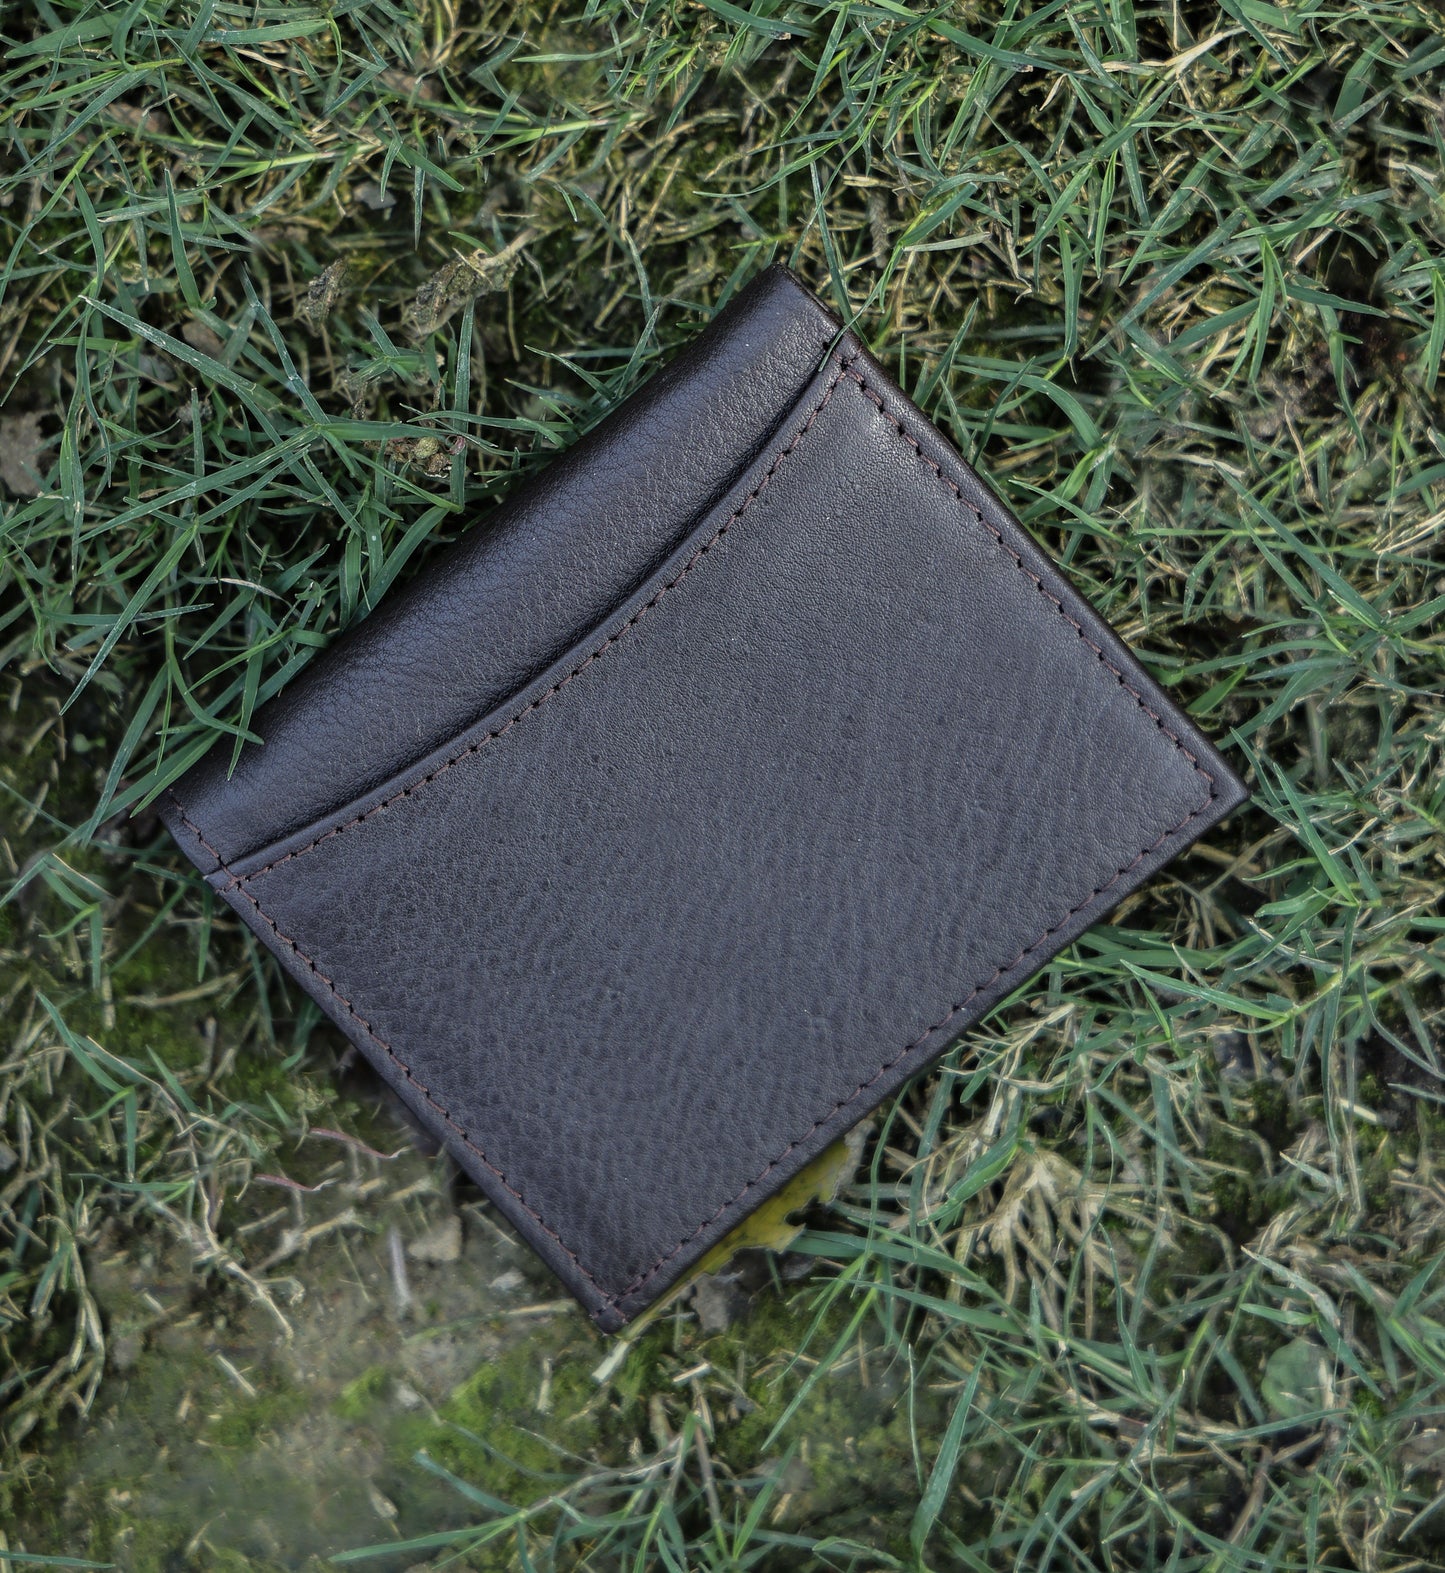 Introducing our Leather Wallet – A Timeless Classic, Art:- LA-1404